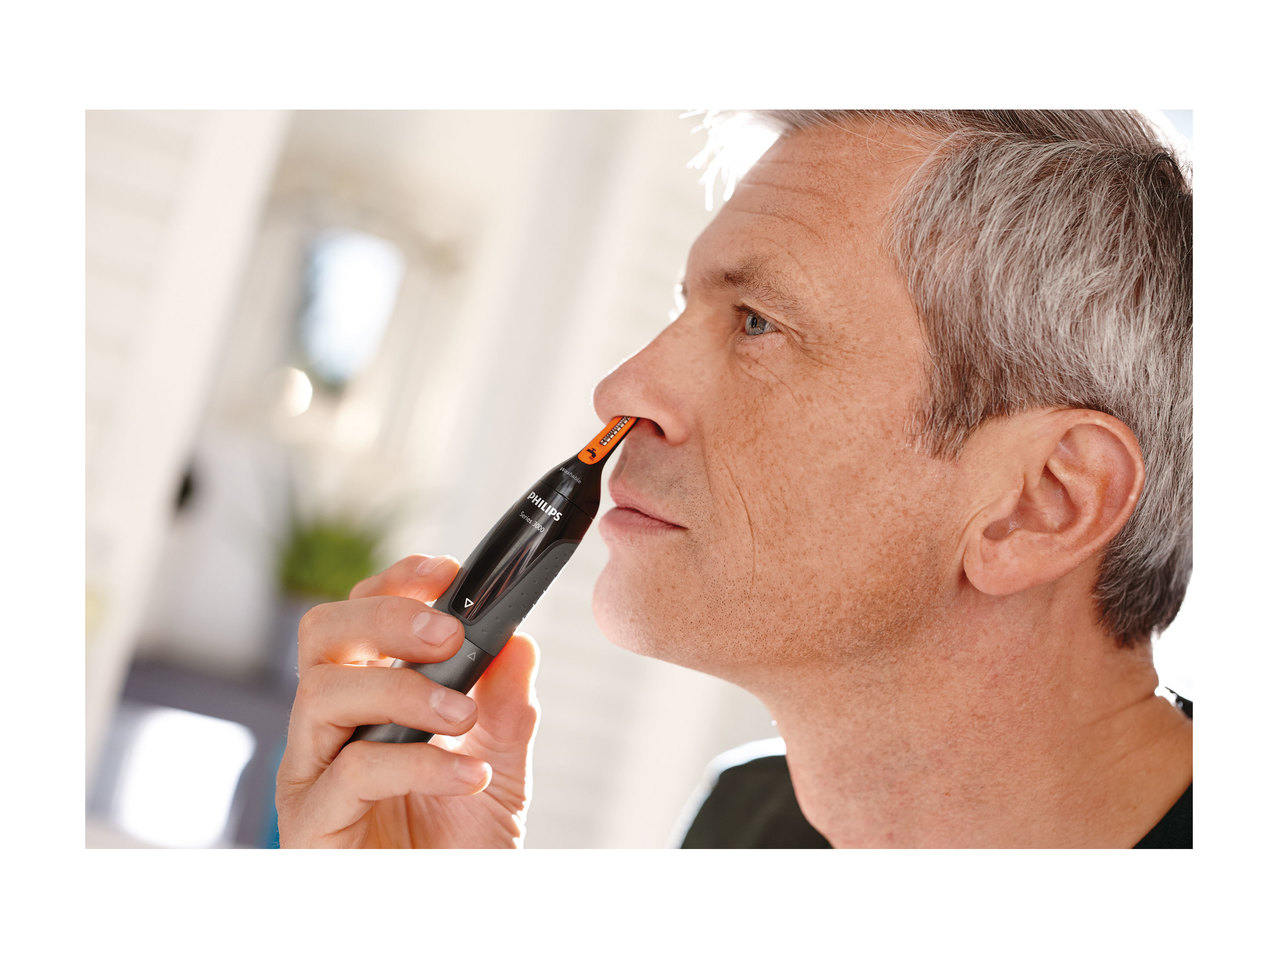 Philips Nose Trimmer1